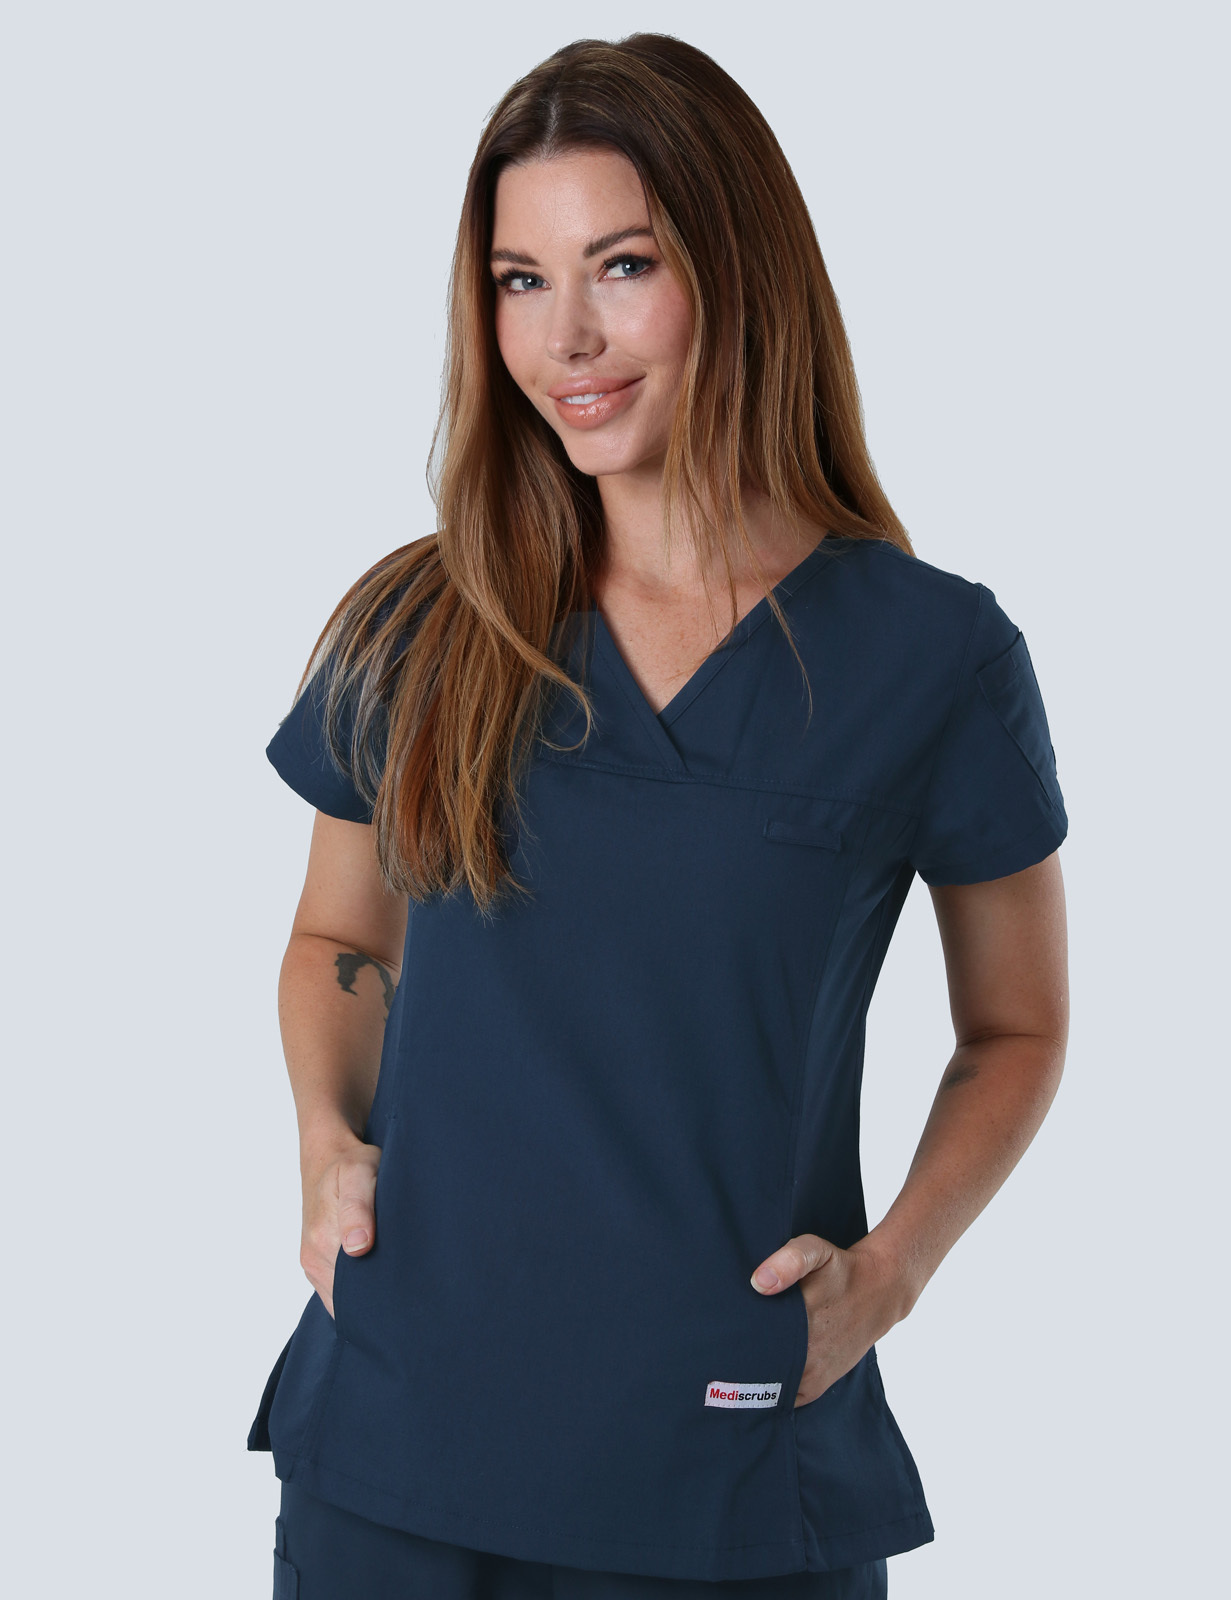 Monash Health - ER Nurse (Women's Fit Solid Scrub Top and Cargo Pants in Navy incl Logos)